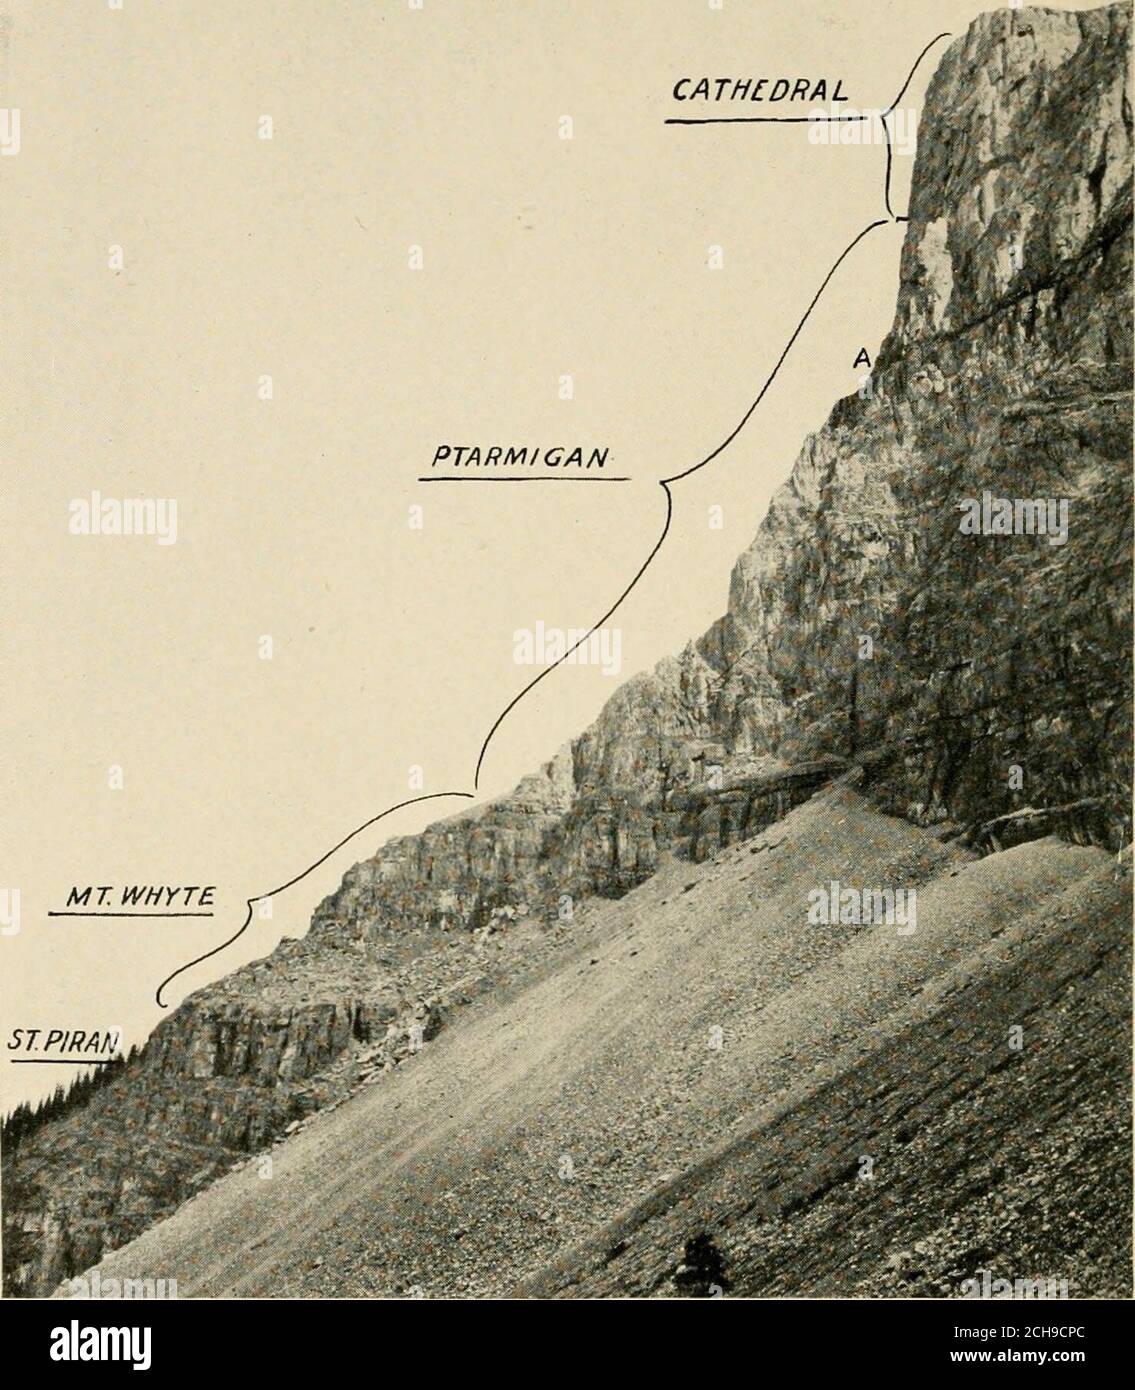 . Smithsonian miscellaneous collections . North profile of ridge above and southeast of Ross Lake, i mile (1.6 km.)south of Stephen Station on the Canadian Pacific Railway. The position of the Albertella zone is shown at A where the thin bandof shale forms a dark, narrow band that may be seen from the KickingHorse Pass. The relative positions of the Cathedral, Ptarmigan, Mount Whyte, andSt. Piran formations are indicated on the plate. This view should be studied in connection with plate 2. (Photograph byWalcott, 1916.) NO. 2 ALBERTELLA FAUNA IN BRITISH COLUMBIA AXD MONTANA 15 Hyolithes cecrops Stock Photo